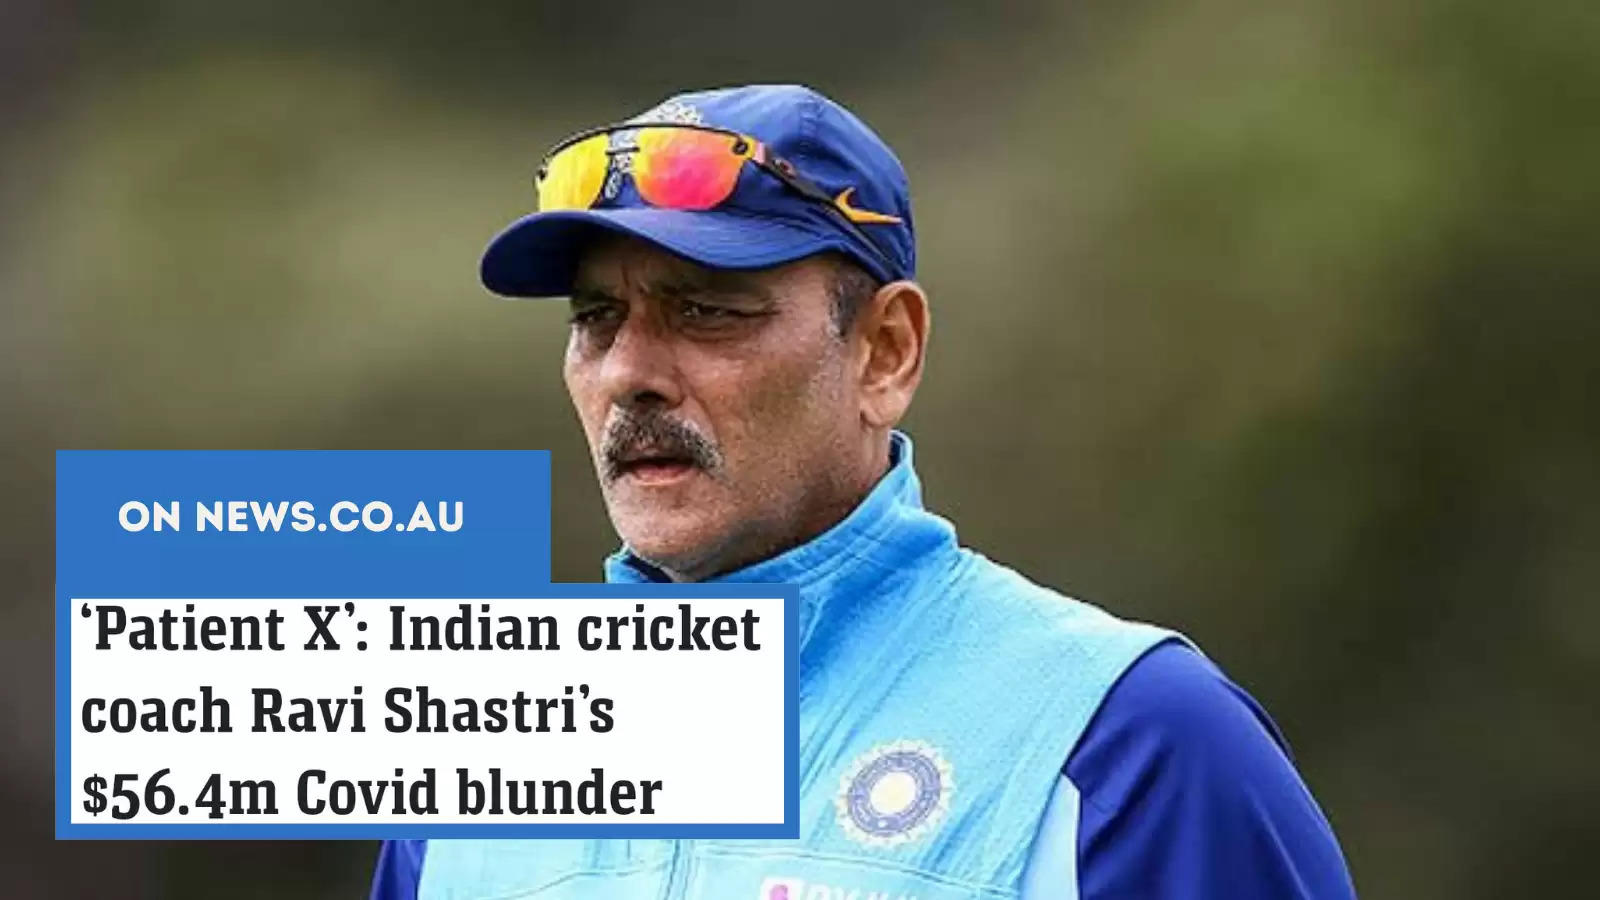 Report on Australia site: “Shastri has demonstrated a flagrant disregard for safety” has demonstrated a flagrant disregard for safety”